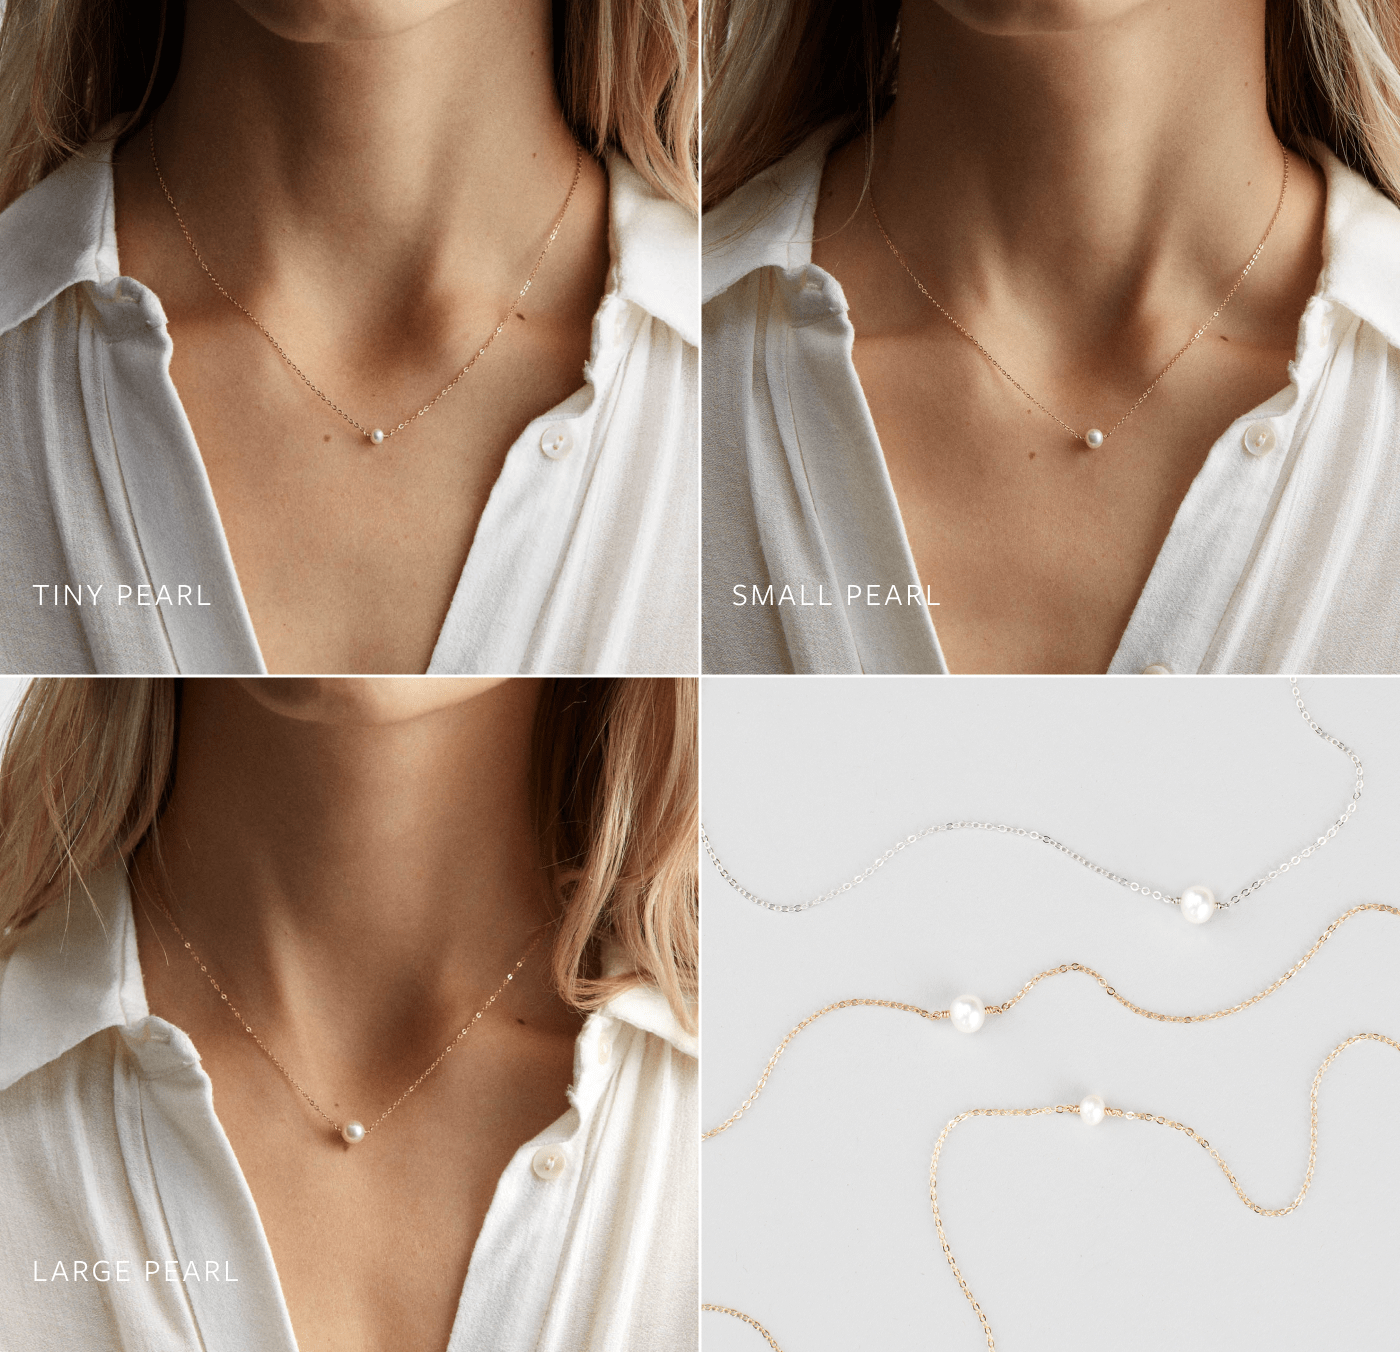 Emanco New Imitation Pearl Necklace Round Small Pearl Multi Size White Pearl  Stainless Women's Clavicle Chain - Necklace - AliExpress